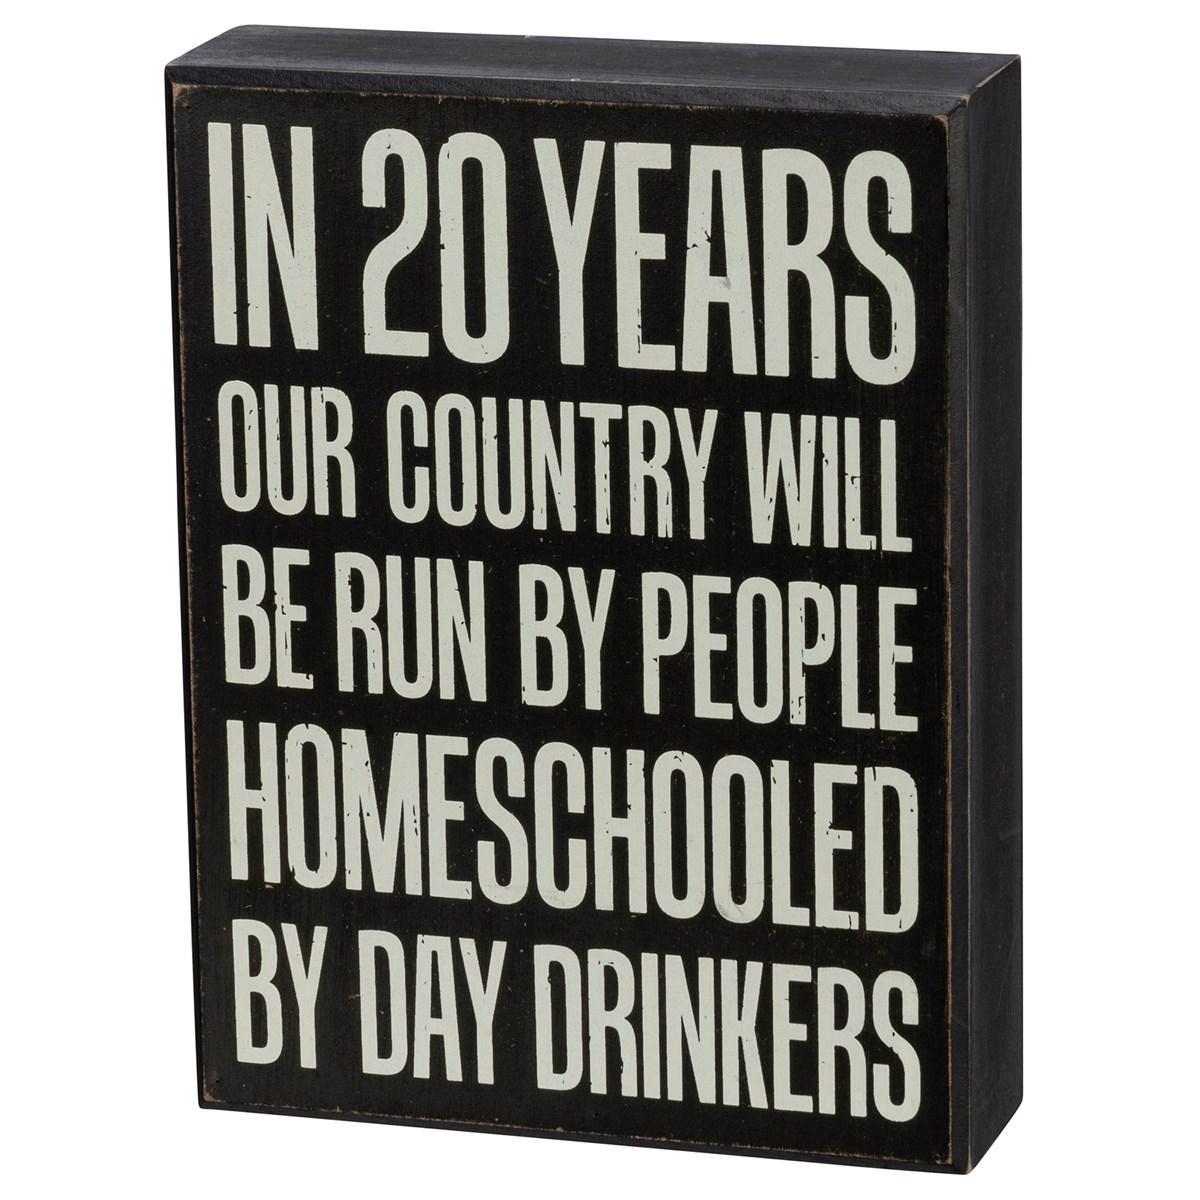 In 20 Years Our Country Will Be Run By People Homeschooled By Day Drinkers Sign